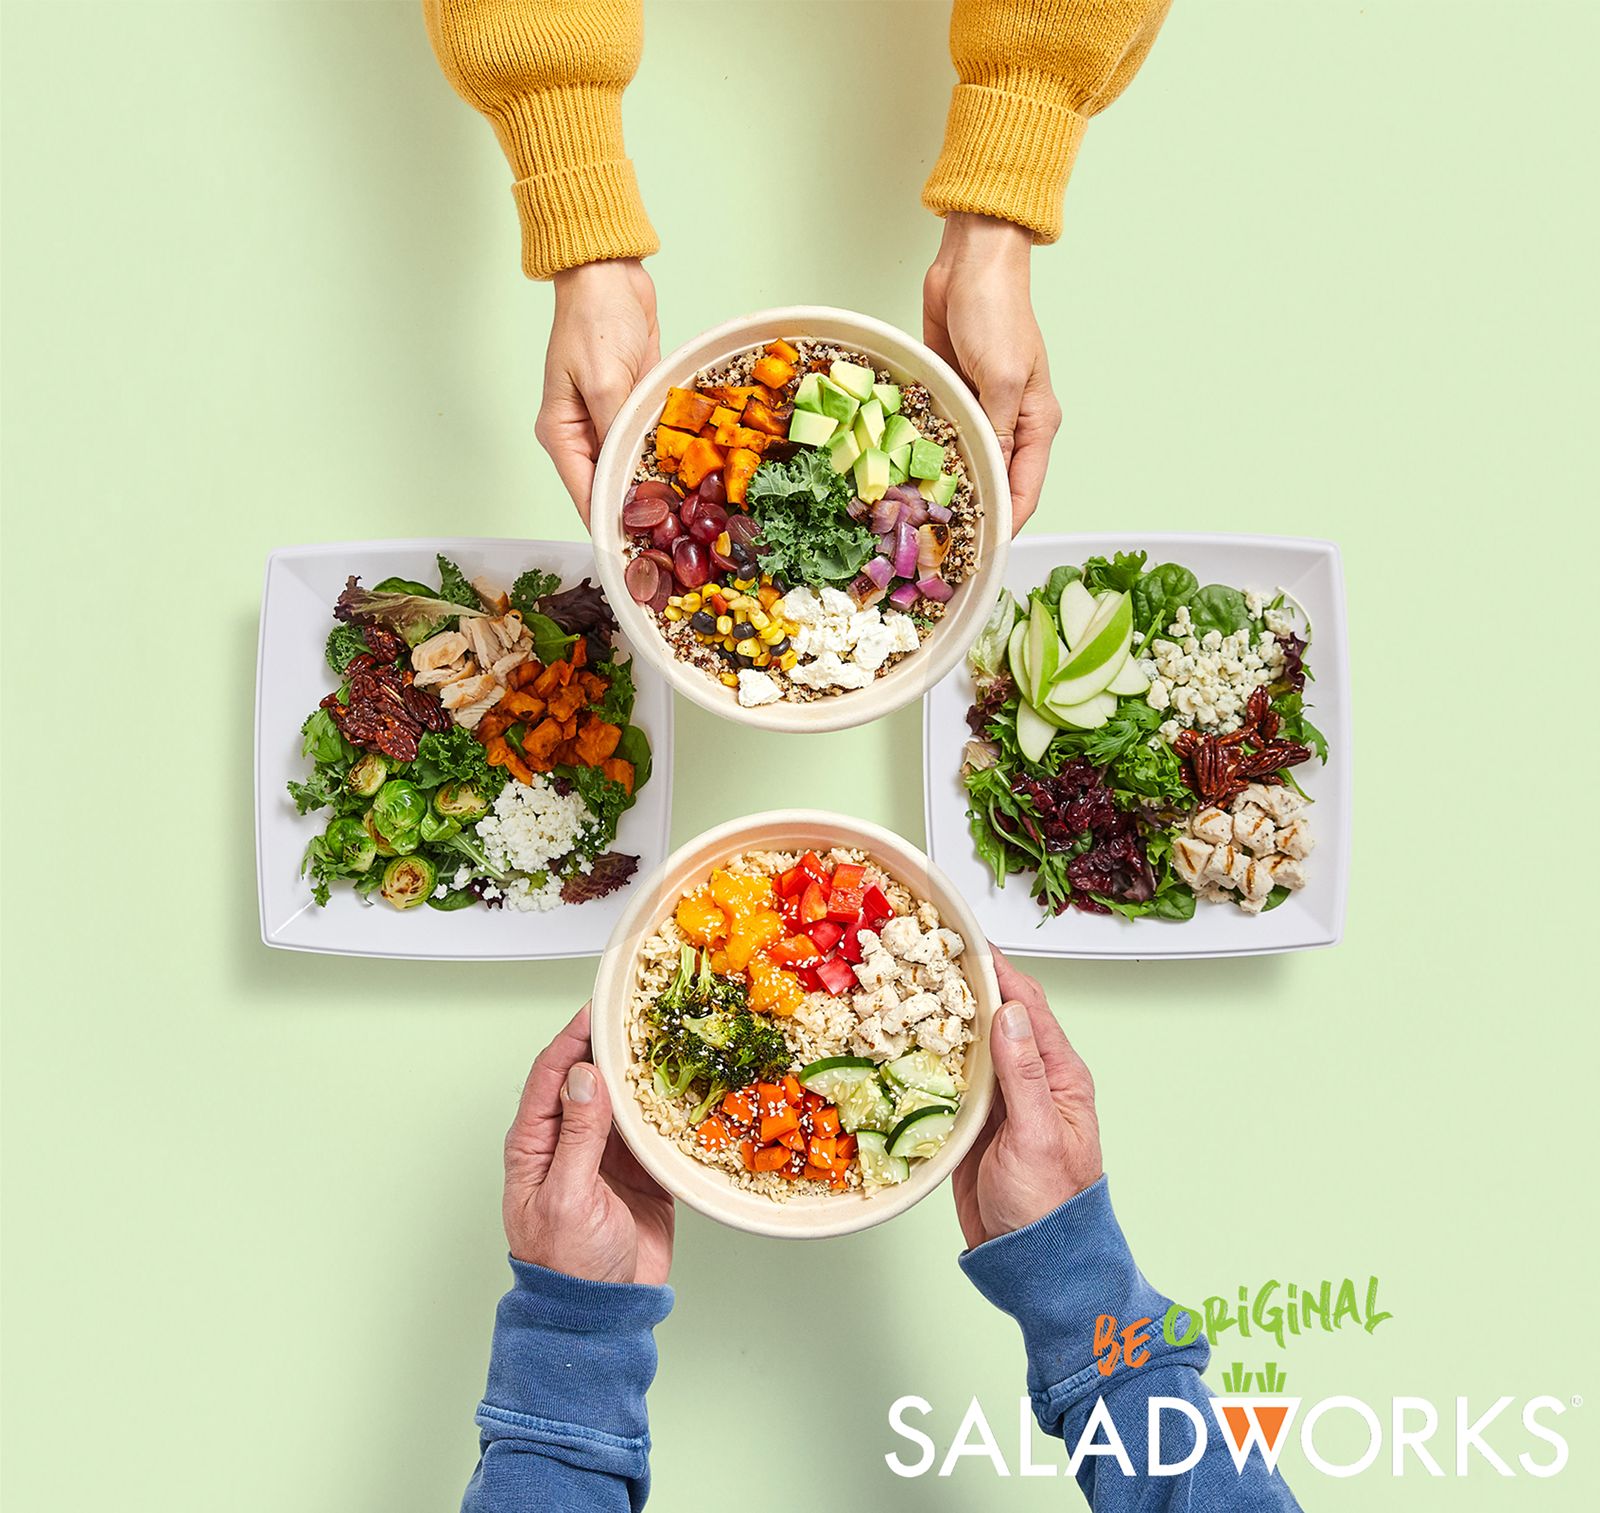 Saladworks' Parent Company Acquires Garbanzo Mediterranean Fresh and Frutta Bowls, Forms WOWorks